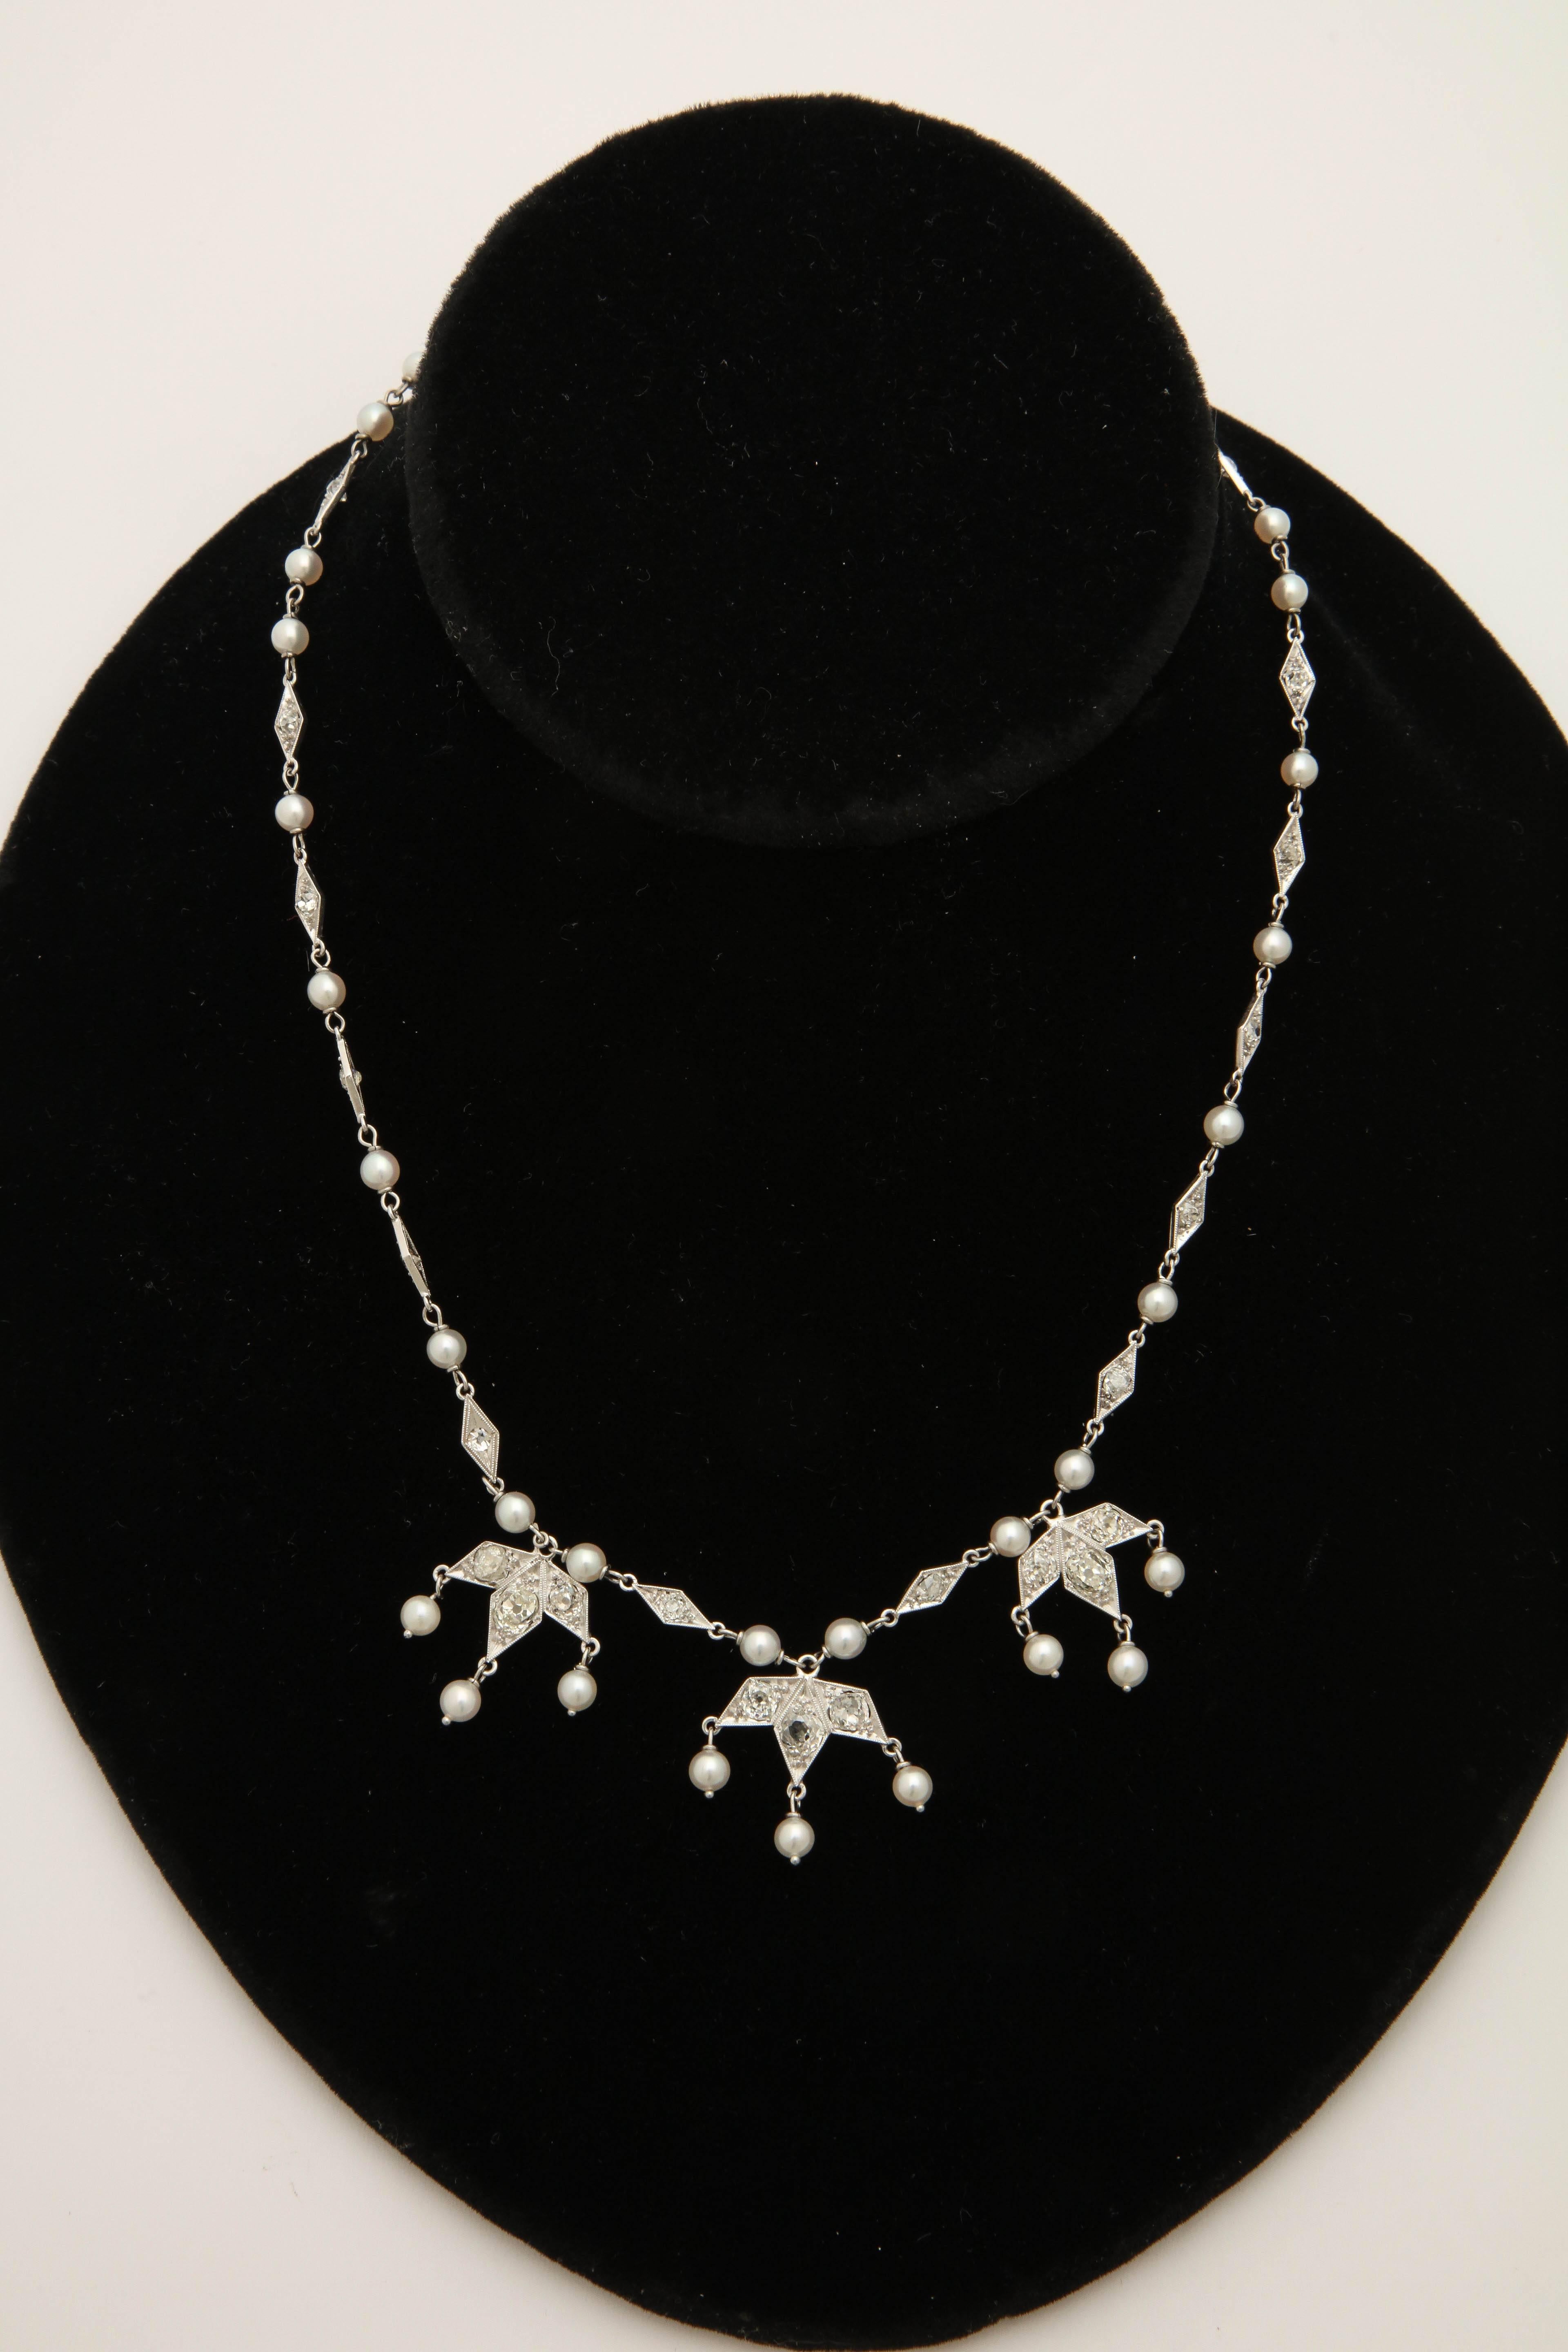 One Ladies Delicate Platinum Necklace Embellished With Numerous Antique Cut Diamonds Weighing Approximately 4 Carats Total Weight. Further Designed With Thirty Seven 3 mm Seed Pearls. Beautiful And Unusual Triple Pendant Design In Front Of Necklace